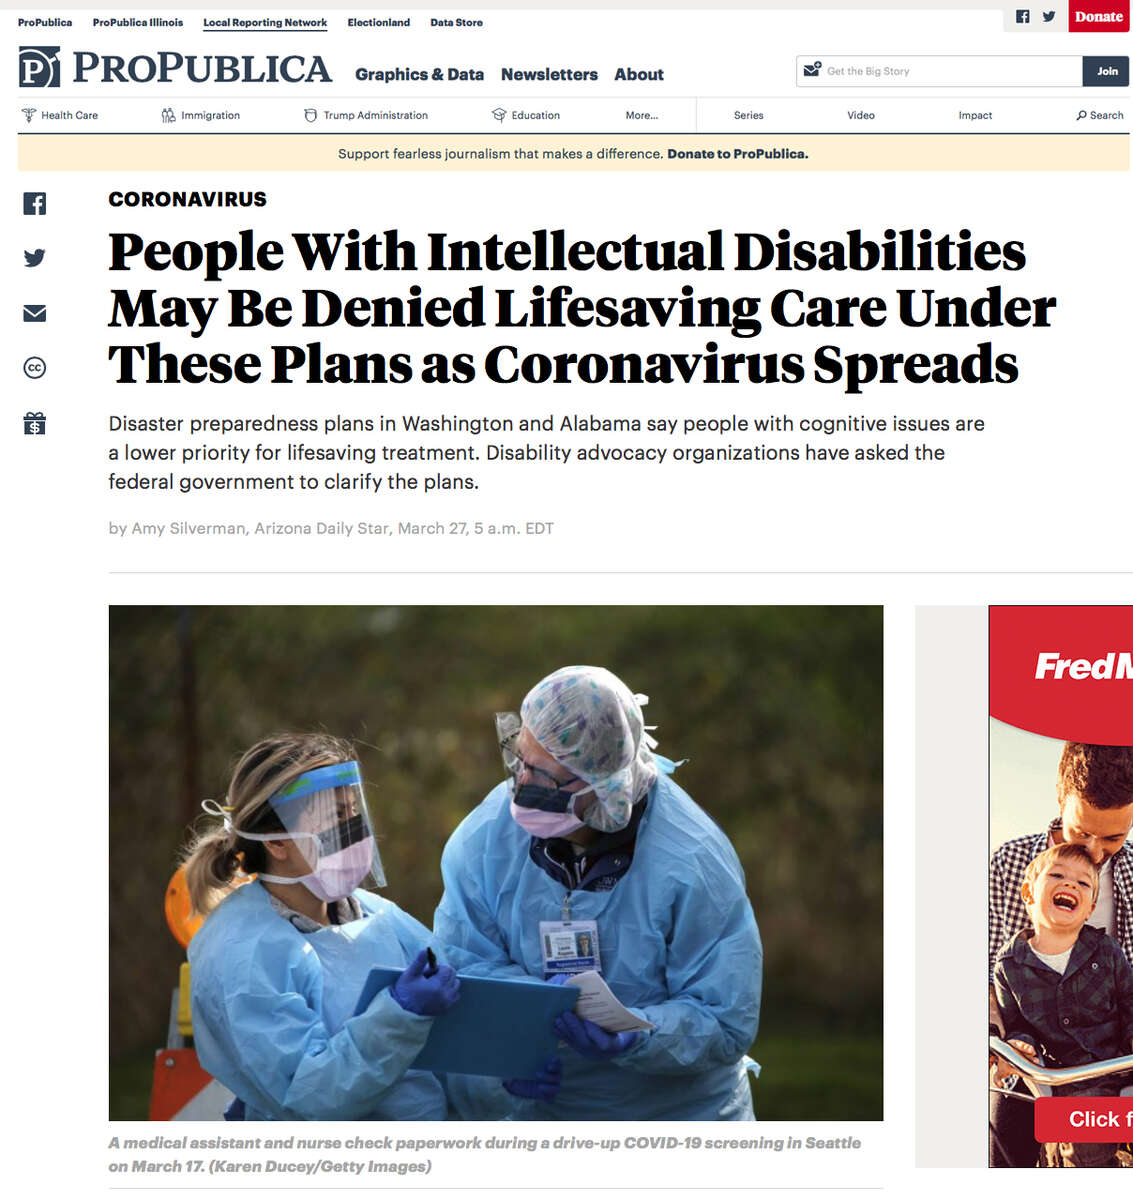 {quote}People With Intellectual Disabilities May Be Denied Lifesaving Care Under These Plans as Coronavirus Spreads{quote}, photo for Getty Images, published in ProPublica, March 27, 2020.